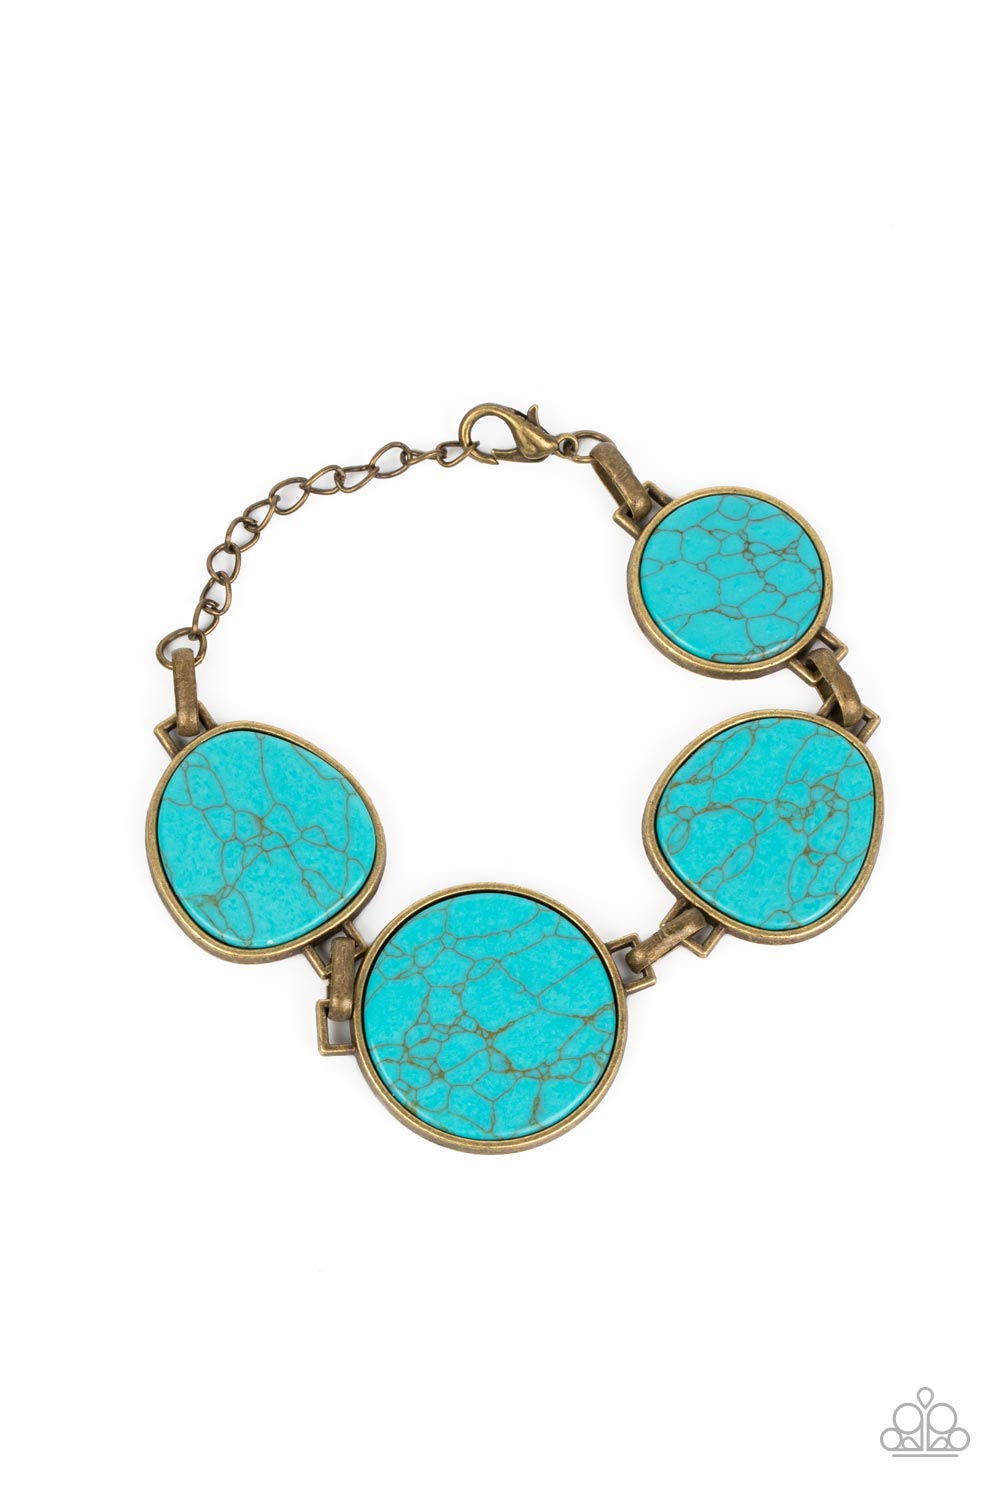 Flat Out Frontier - Brass and Turquoise Stone Bracelet - Paparazzi Accessories - Flat turquoise stones pressed into brass frames provide a statement focal point around the wrist. Features an adjustable clasp closure. As the stone elements in this piece are natural, some color variation is normal. Sold as one individual bracelet.